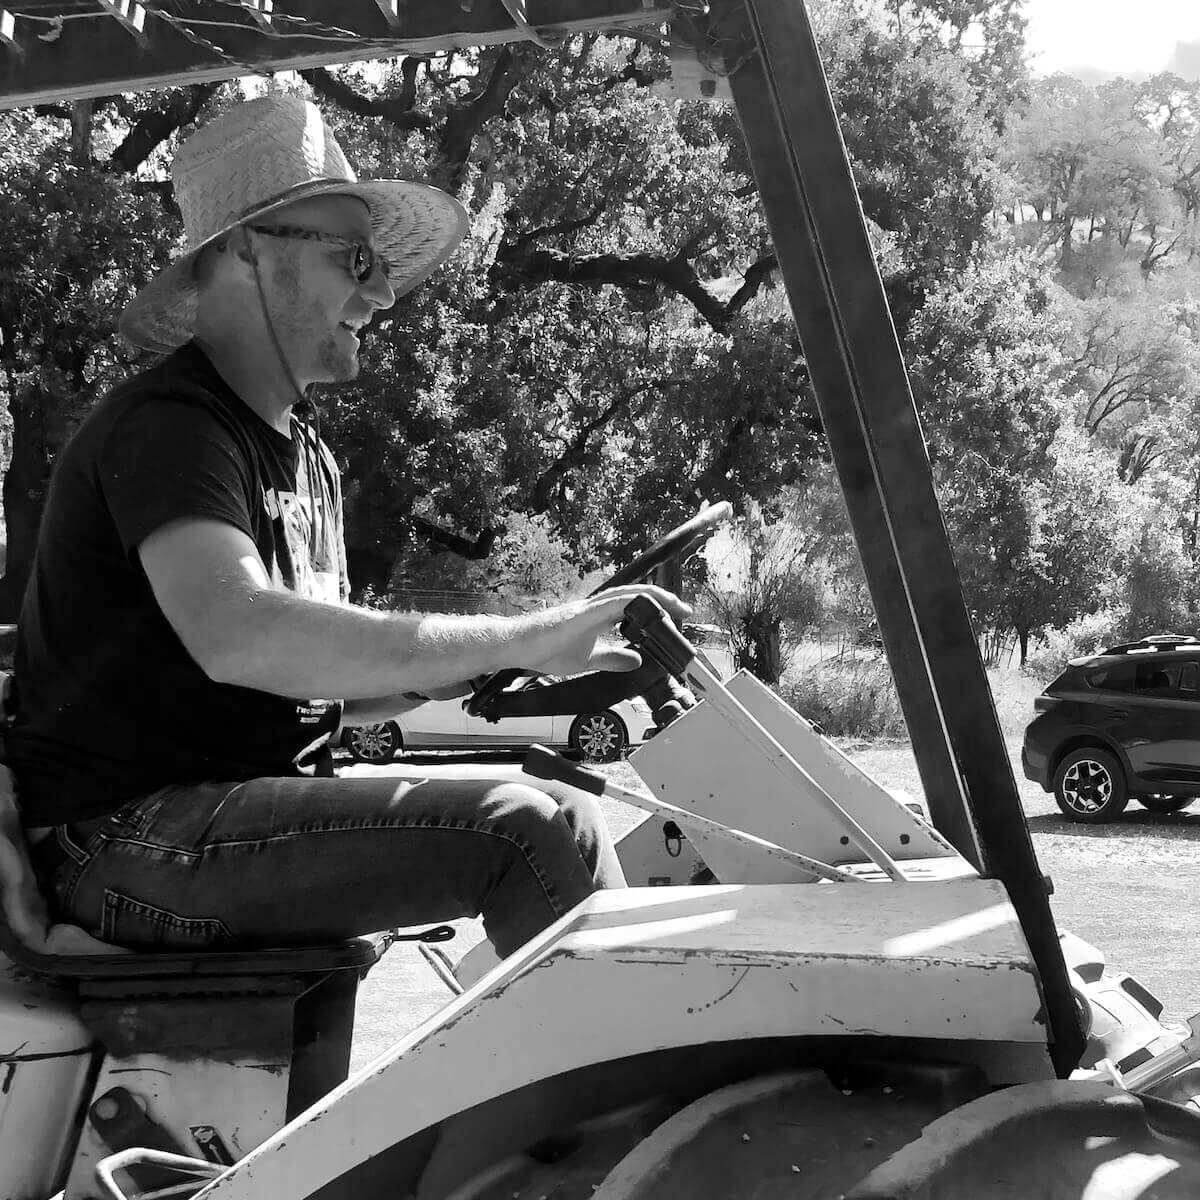 mike driving a tractor 